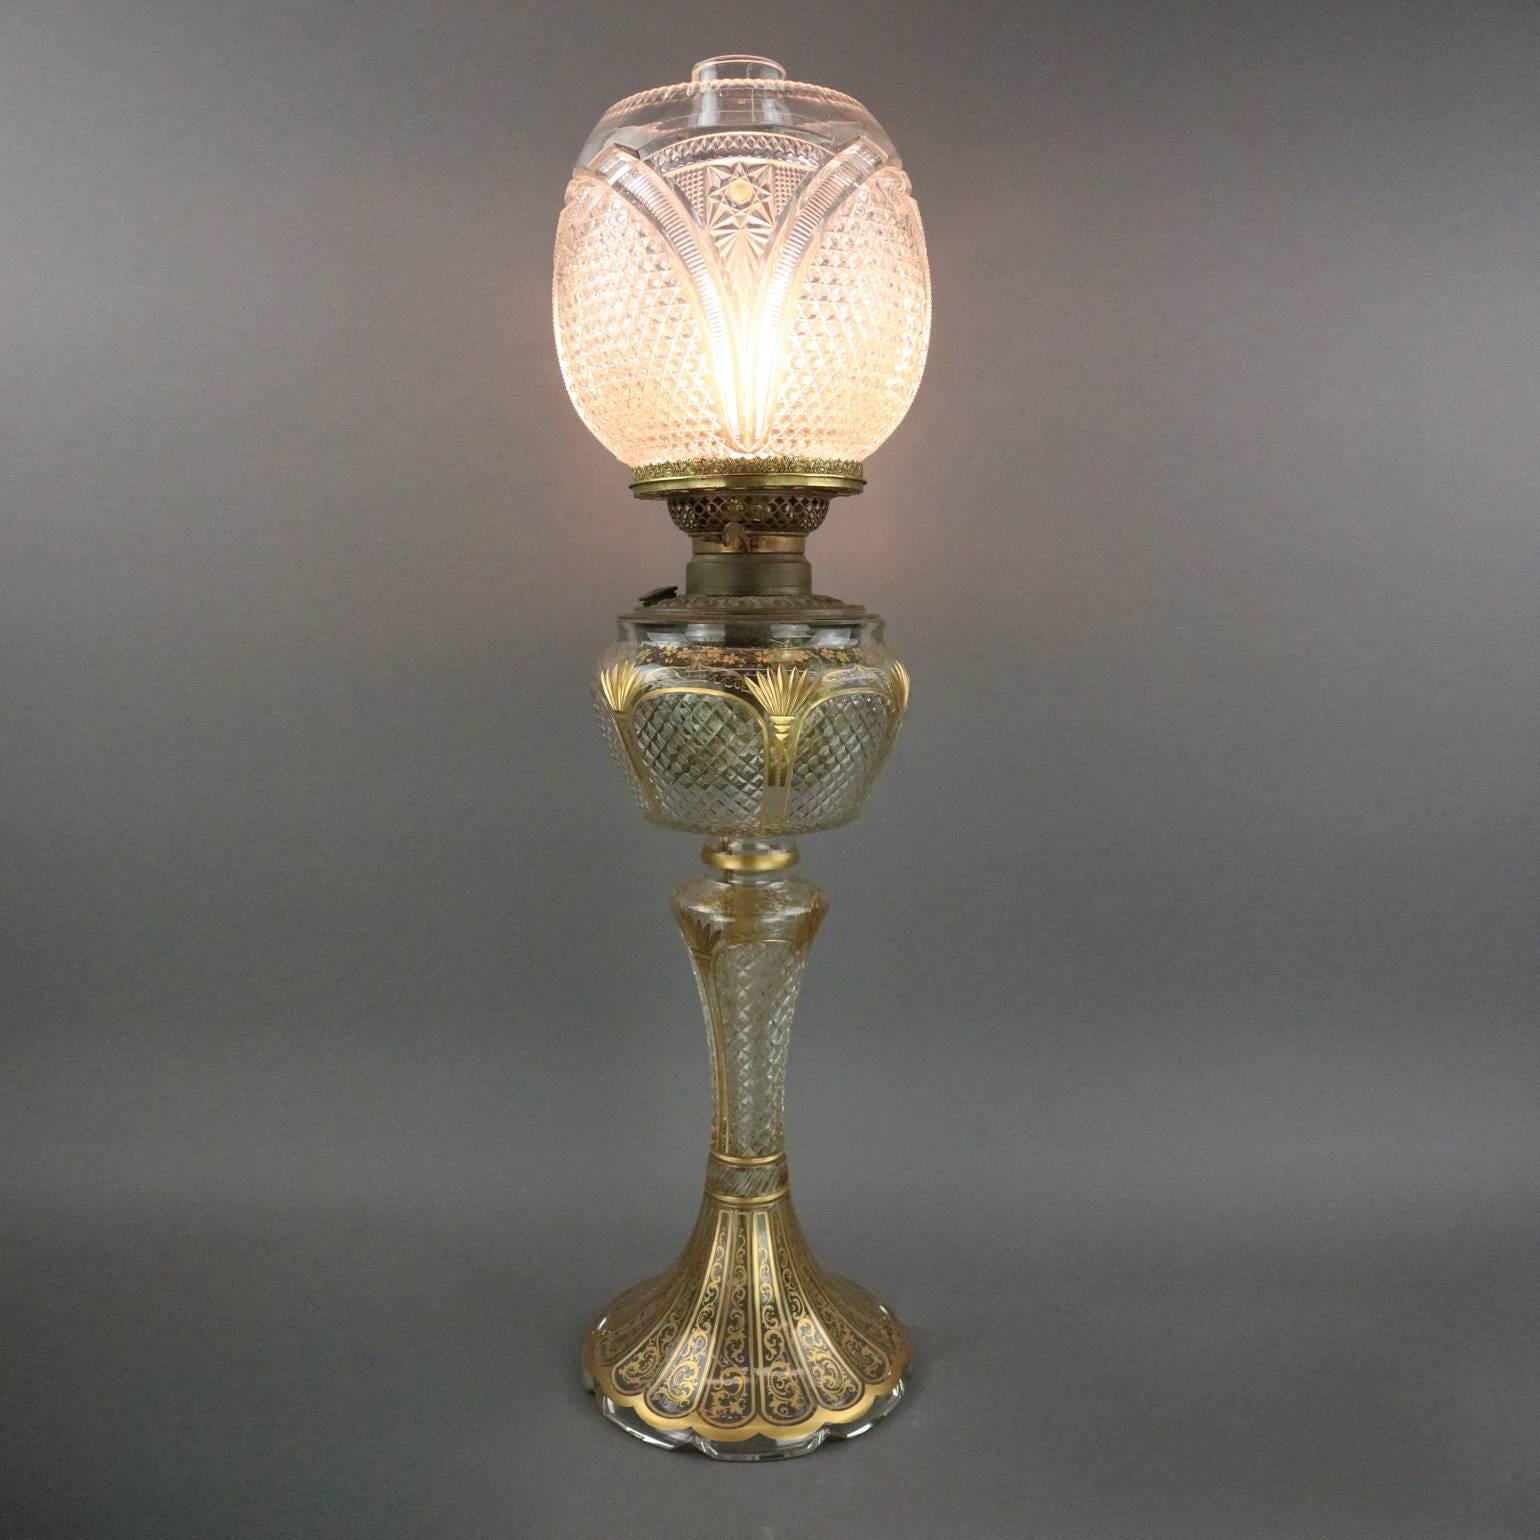 Antique Bradley & Hubbard banquet lamp features cut-glass base and shade decorated with gilt floral and scroll design, signed B&H, electrified, circa 1890.

Measures: 25" height x 7" diameter; 4" diameter fitter.